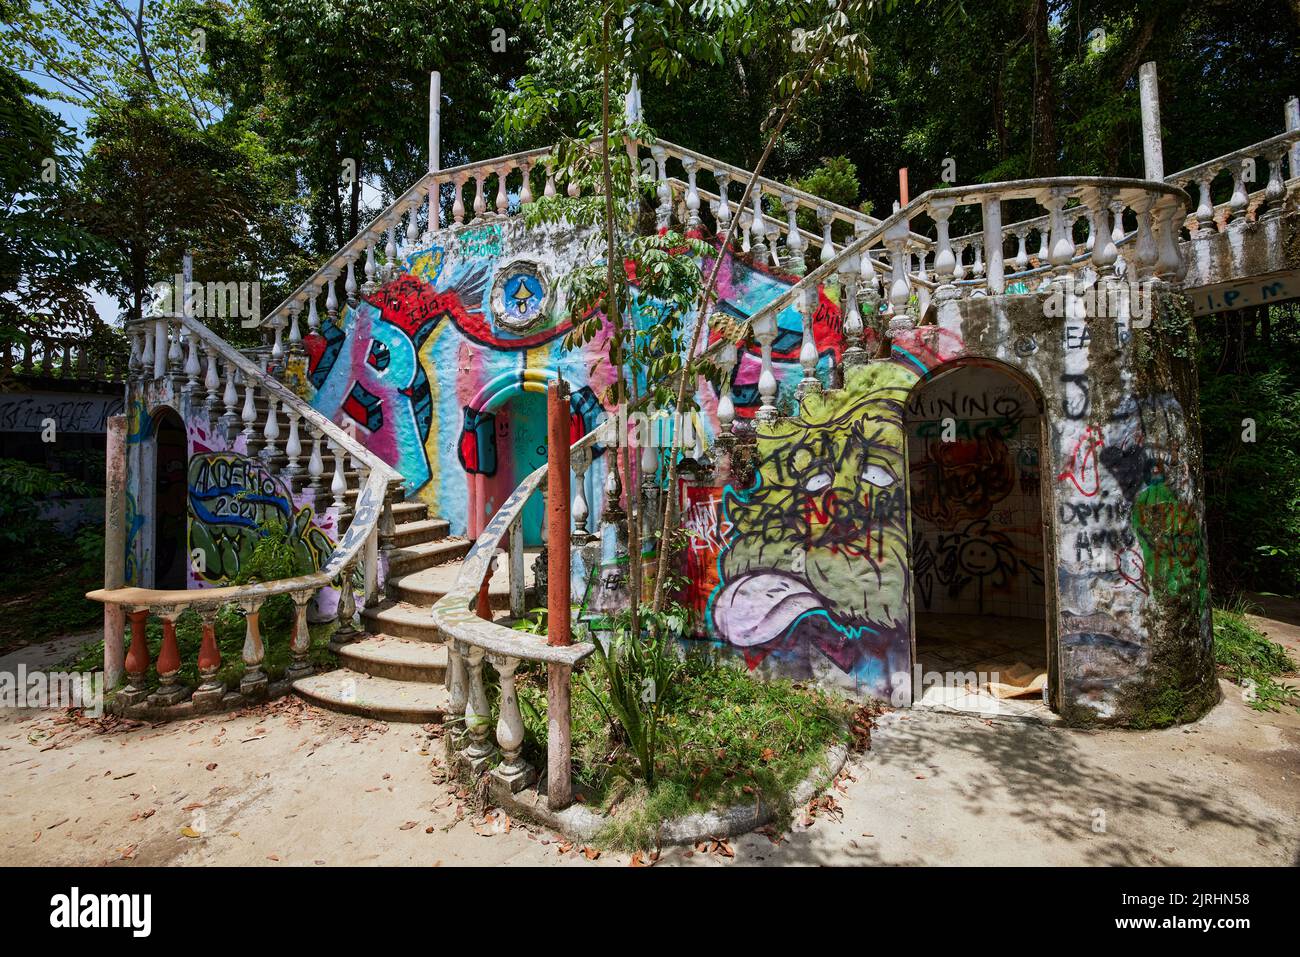 A street graffiti on the abandoned stairs in Playa Hermosa, Costa Rica Stock Photo